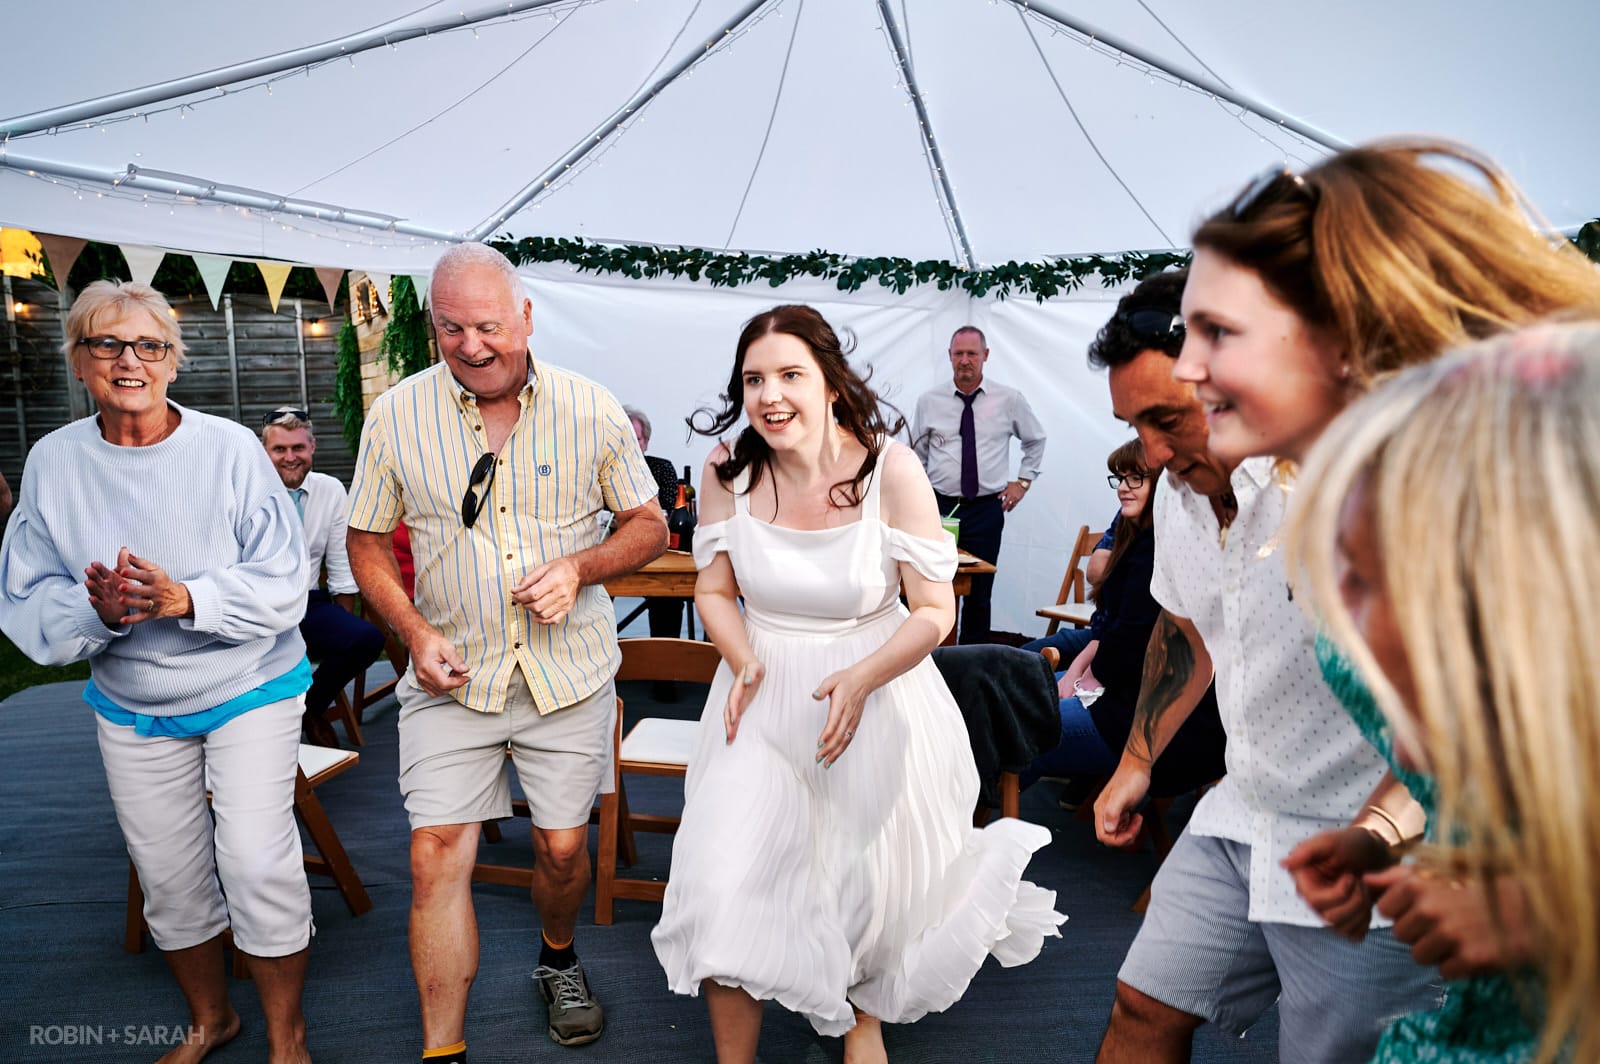 Bride and guests dancing at wedding party held at home